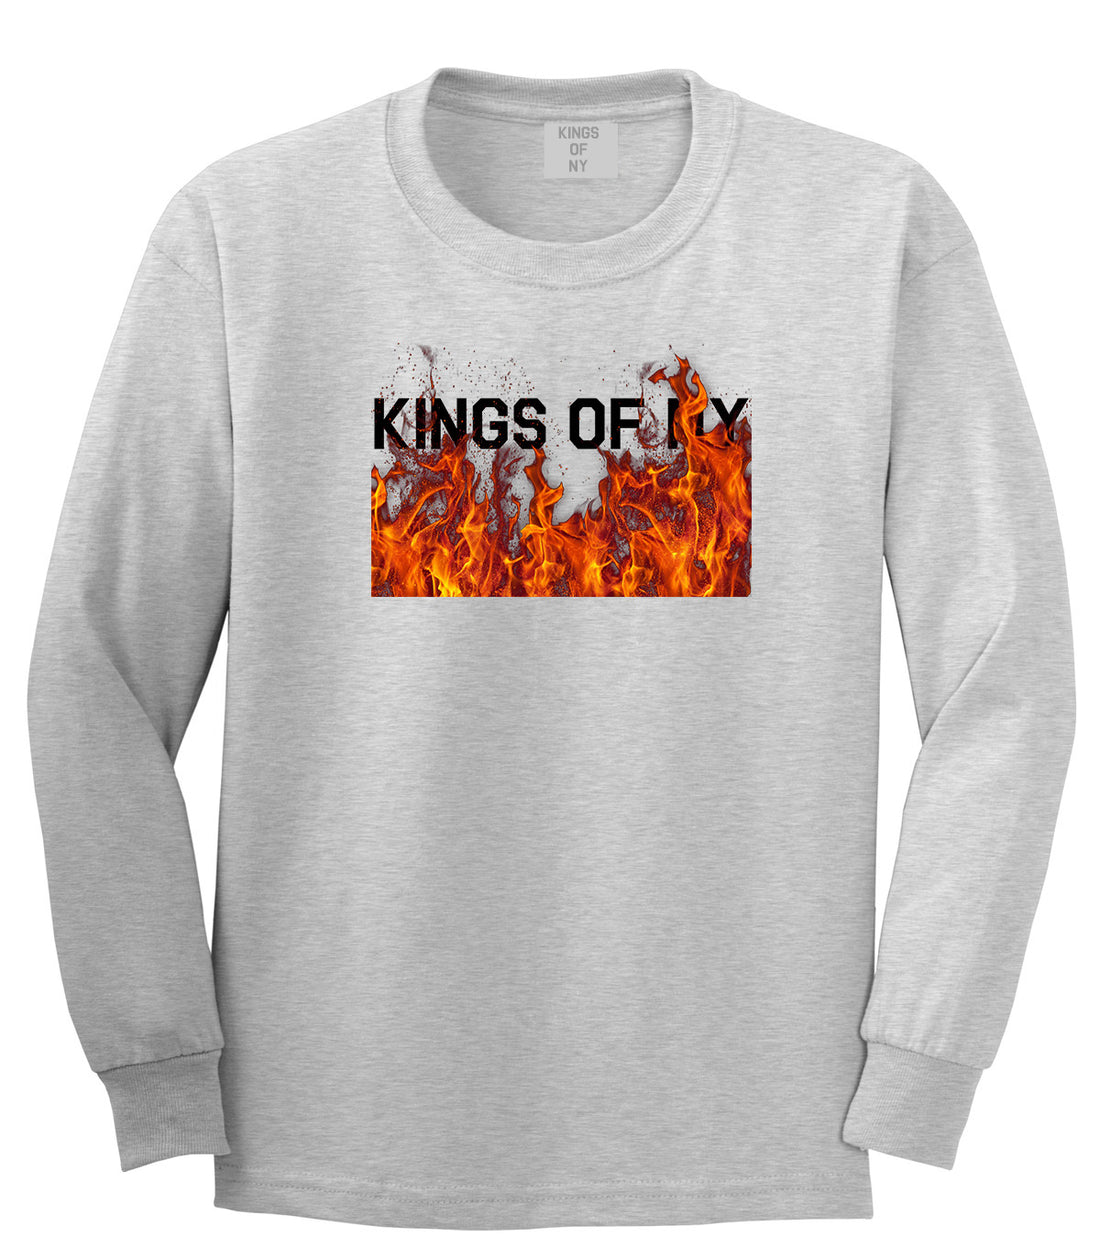 Rising From The Flames Long Sleeve T-Shirt in Grey